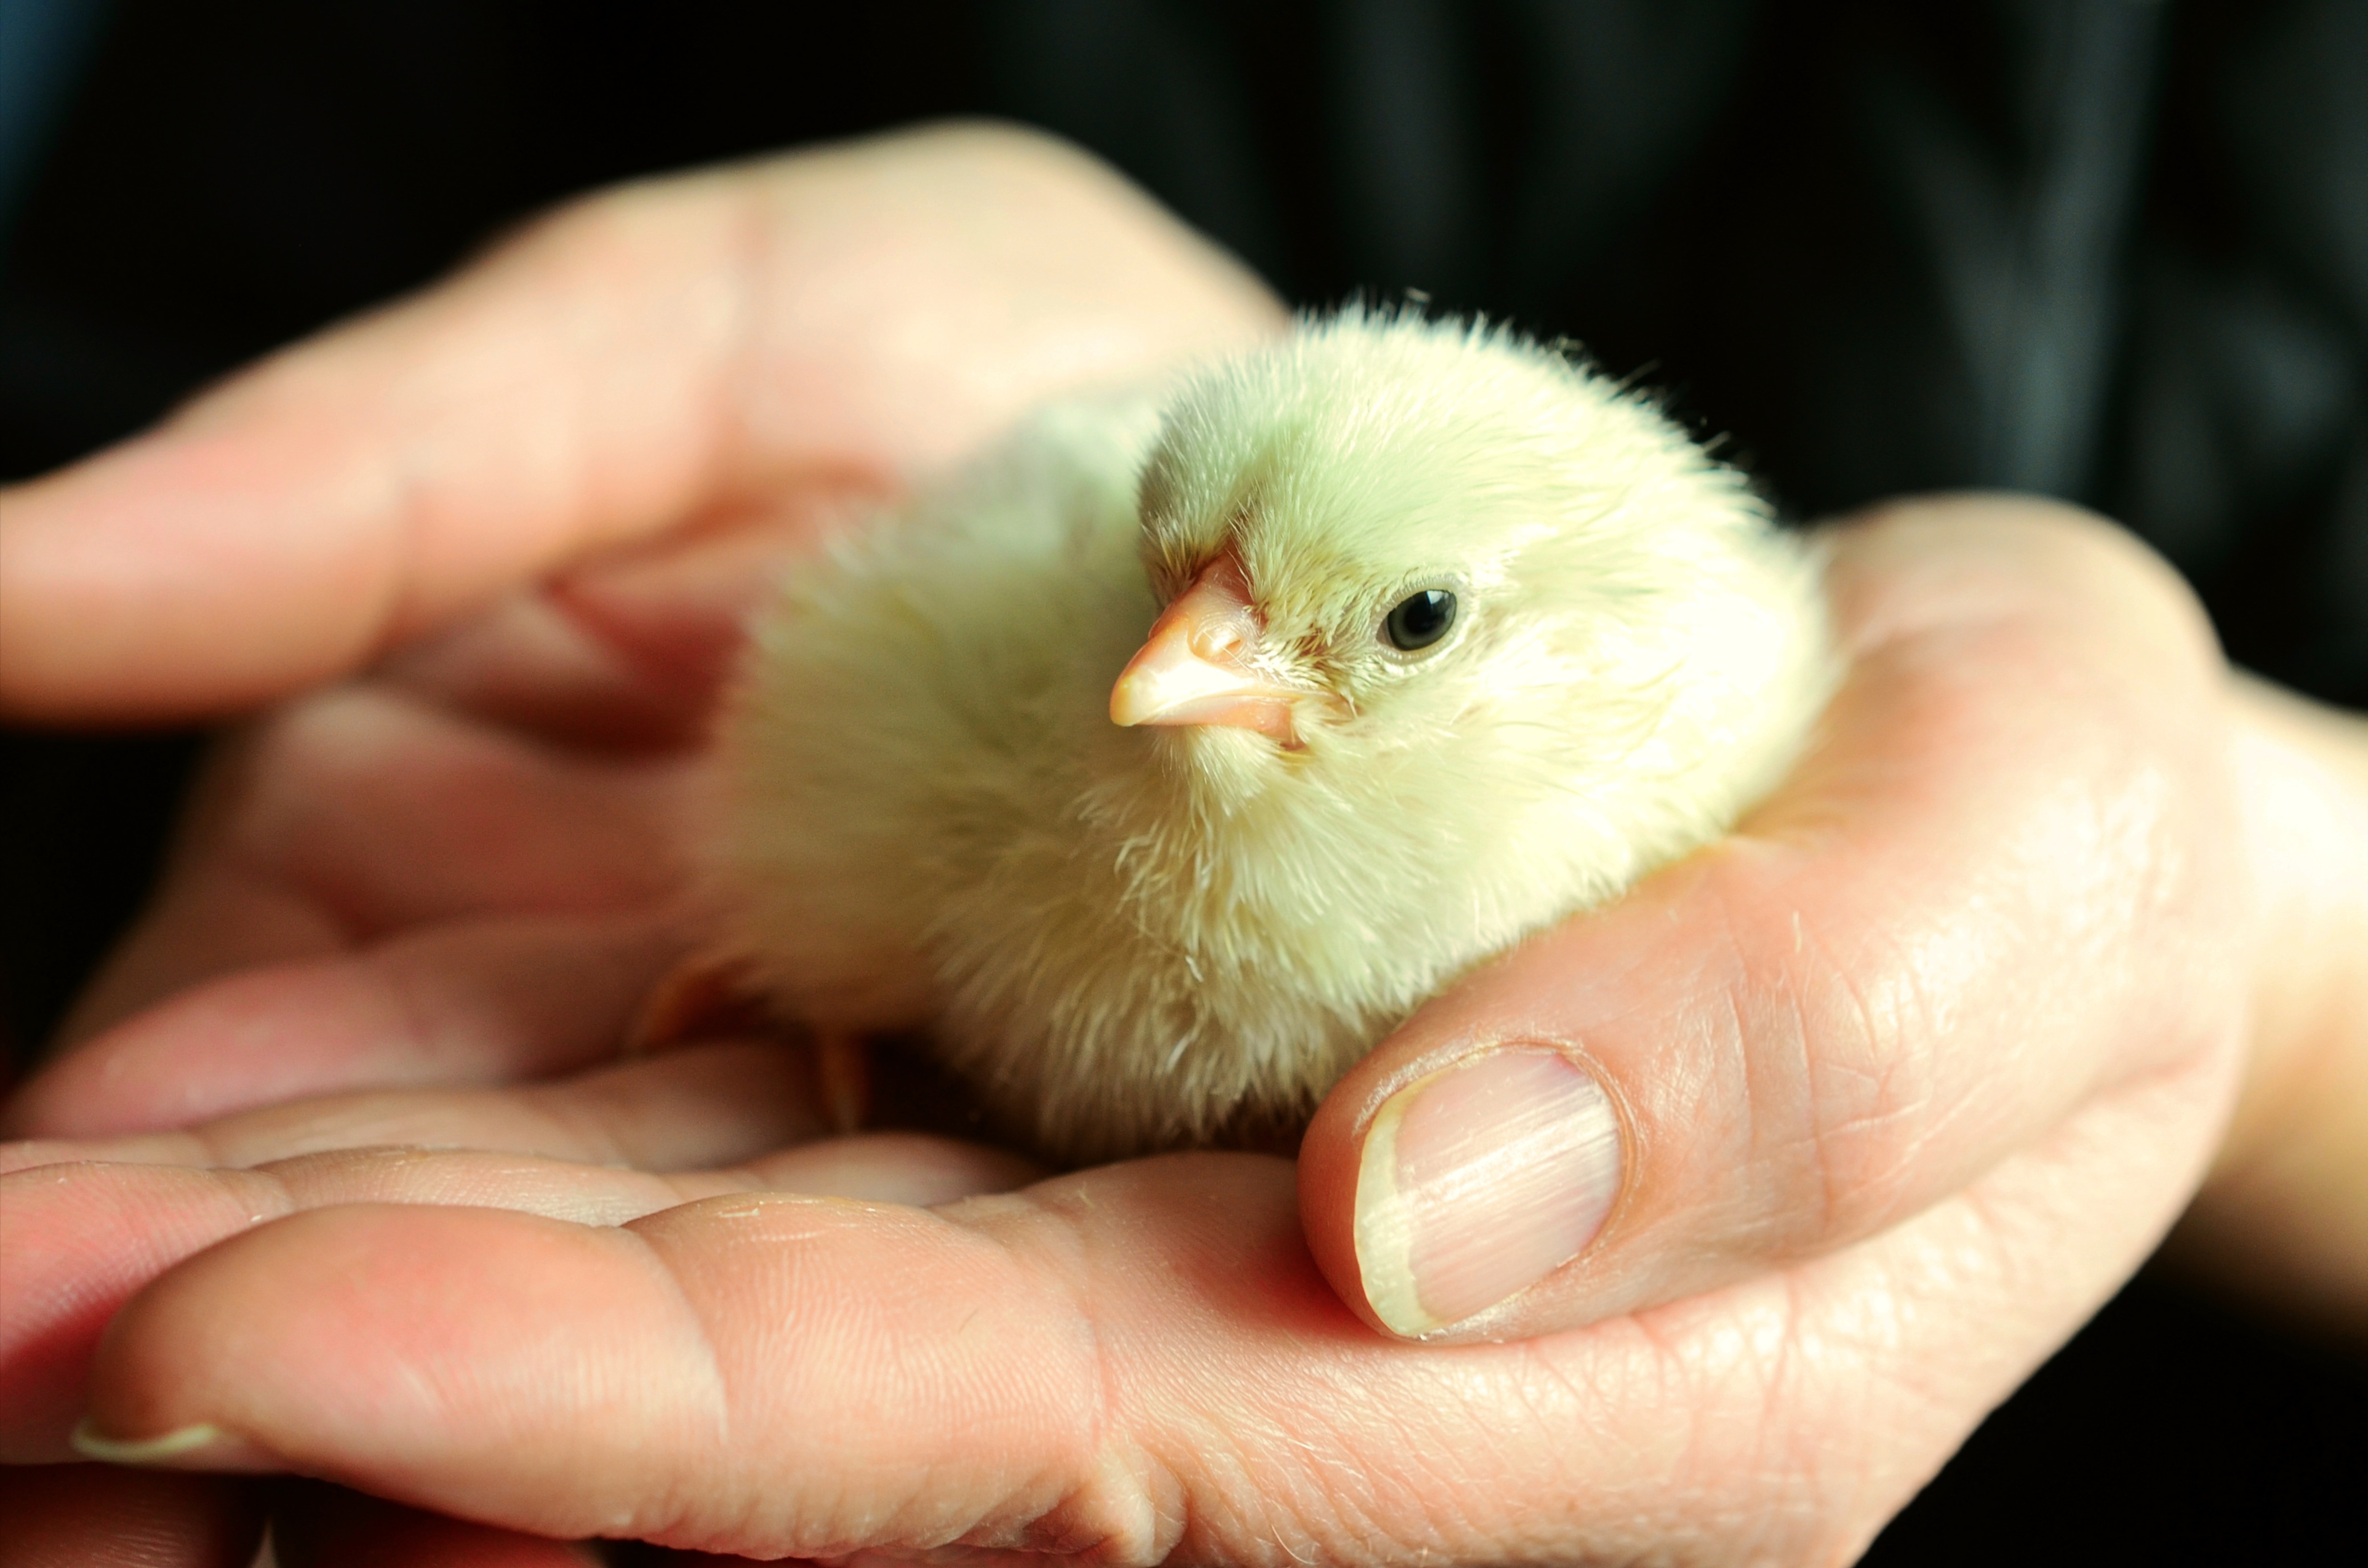 Recovered, Hatched, Chicks, Chicken, human hand, human body part